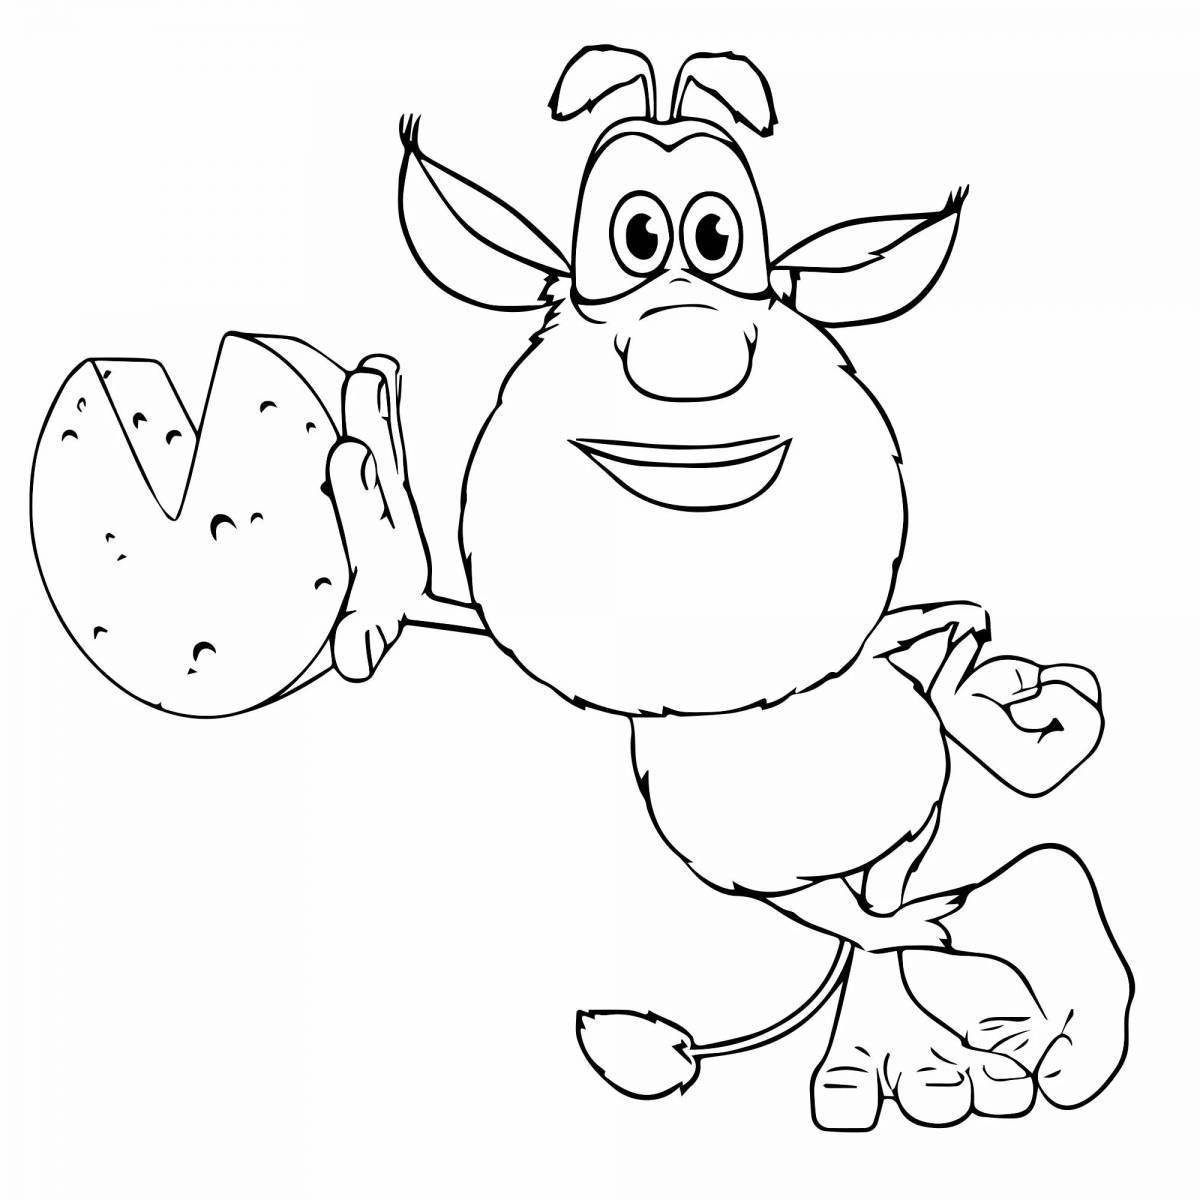 Bubba colorful coloring page